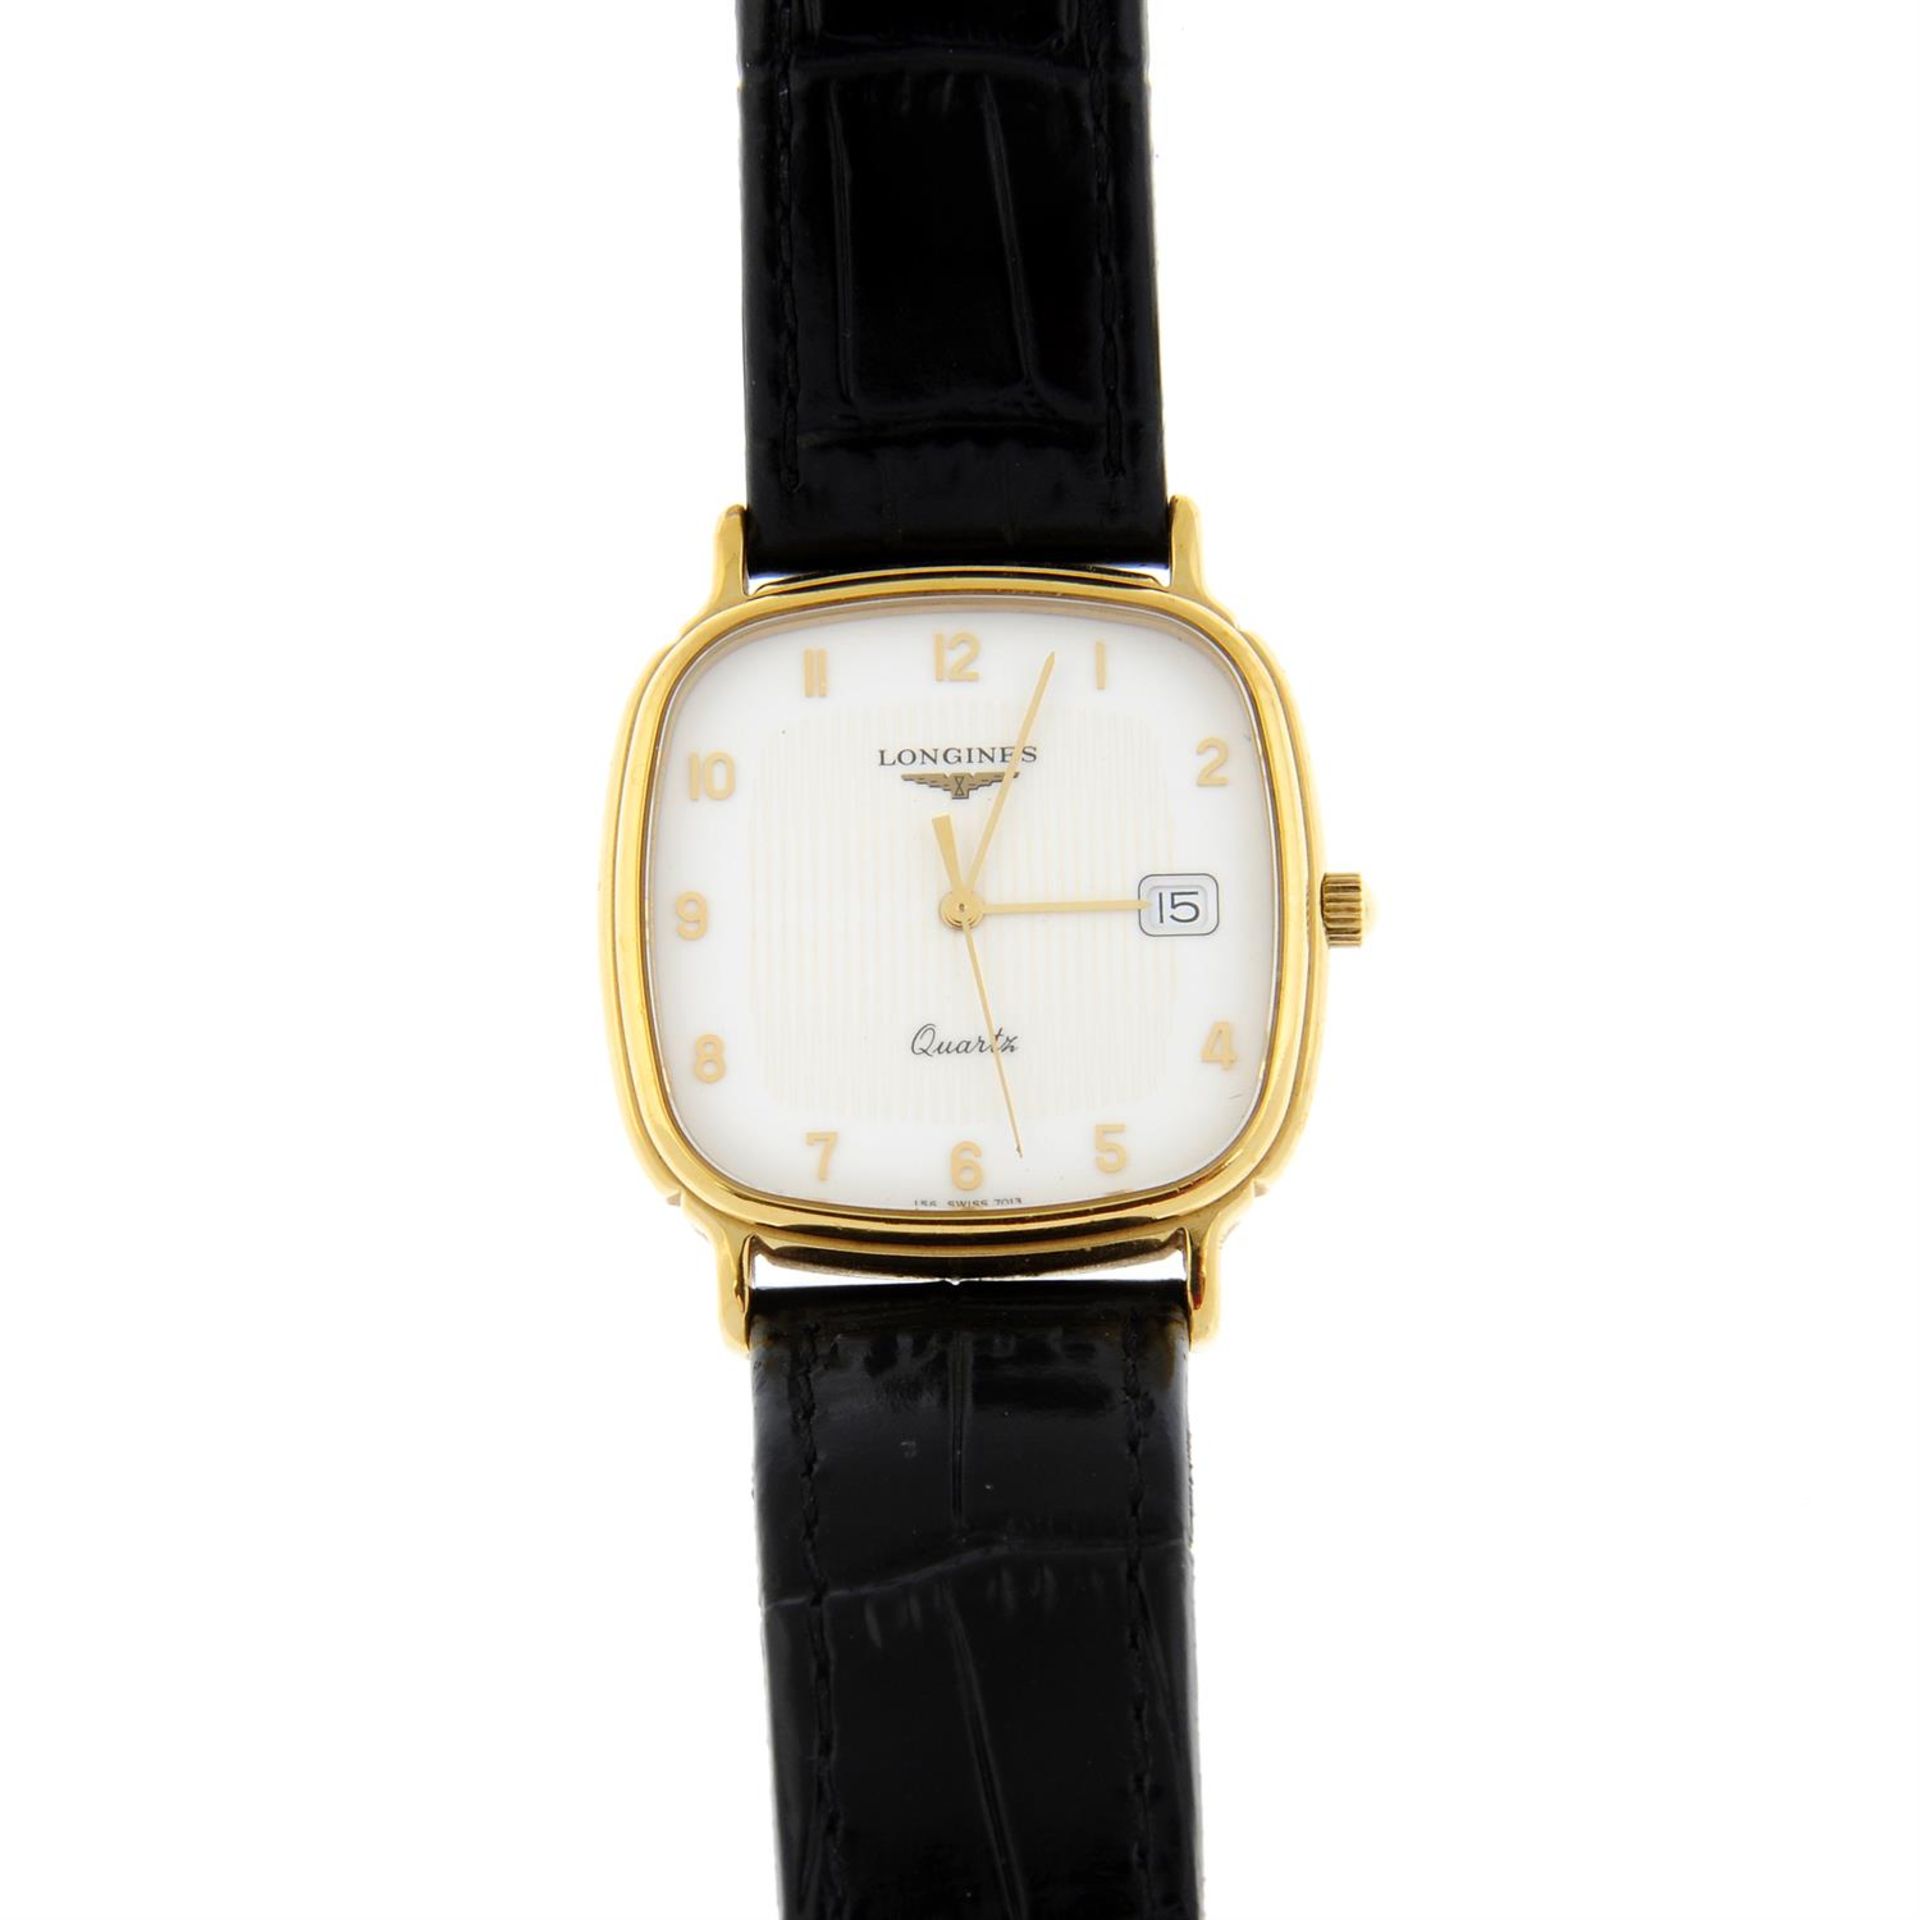 LONGINES - a gold plated Presence wrist watch (33mm) together with another gold plated Longines - Image 3 of 4